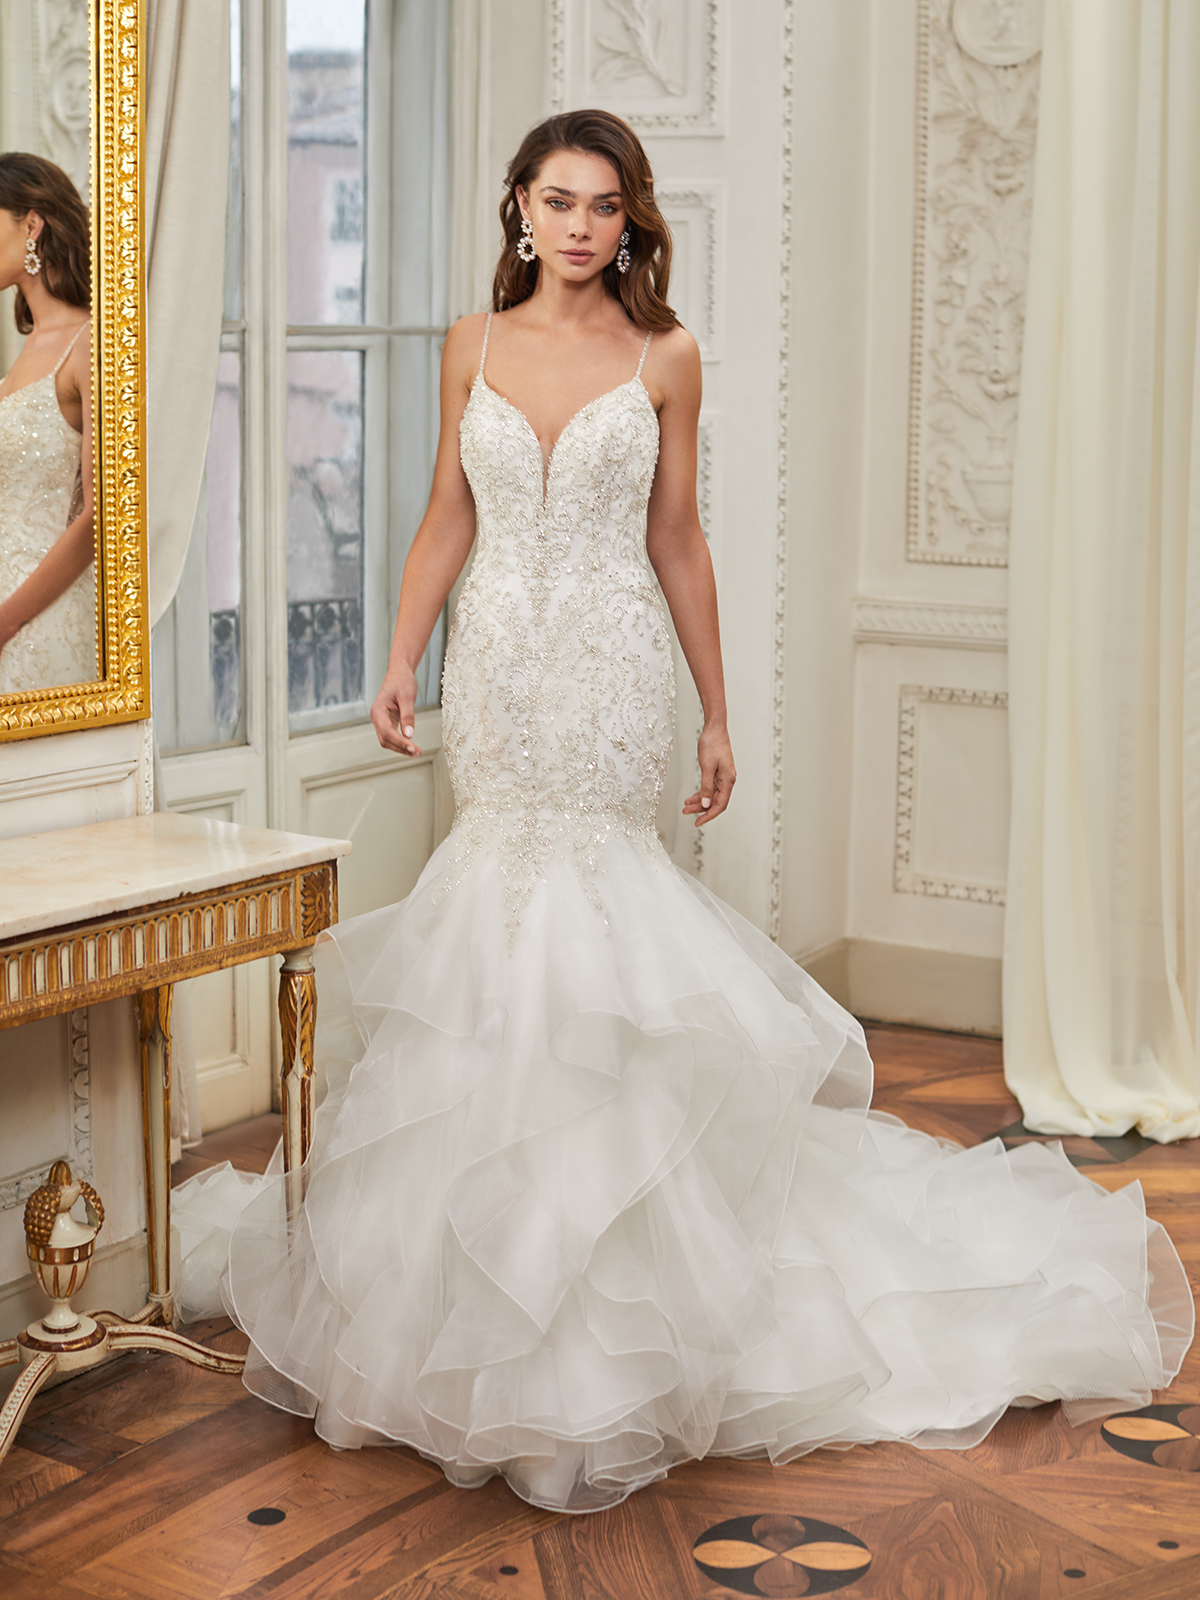 Choosing a wedding dress for different types of female body shapes